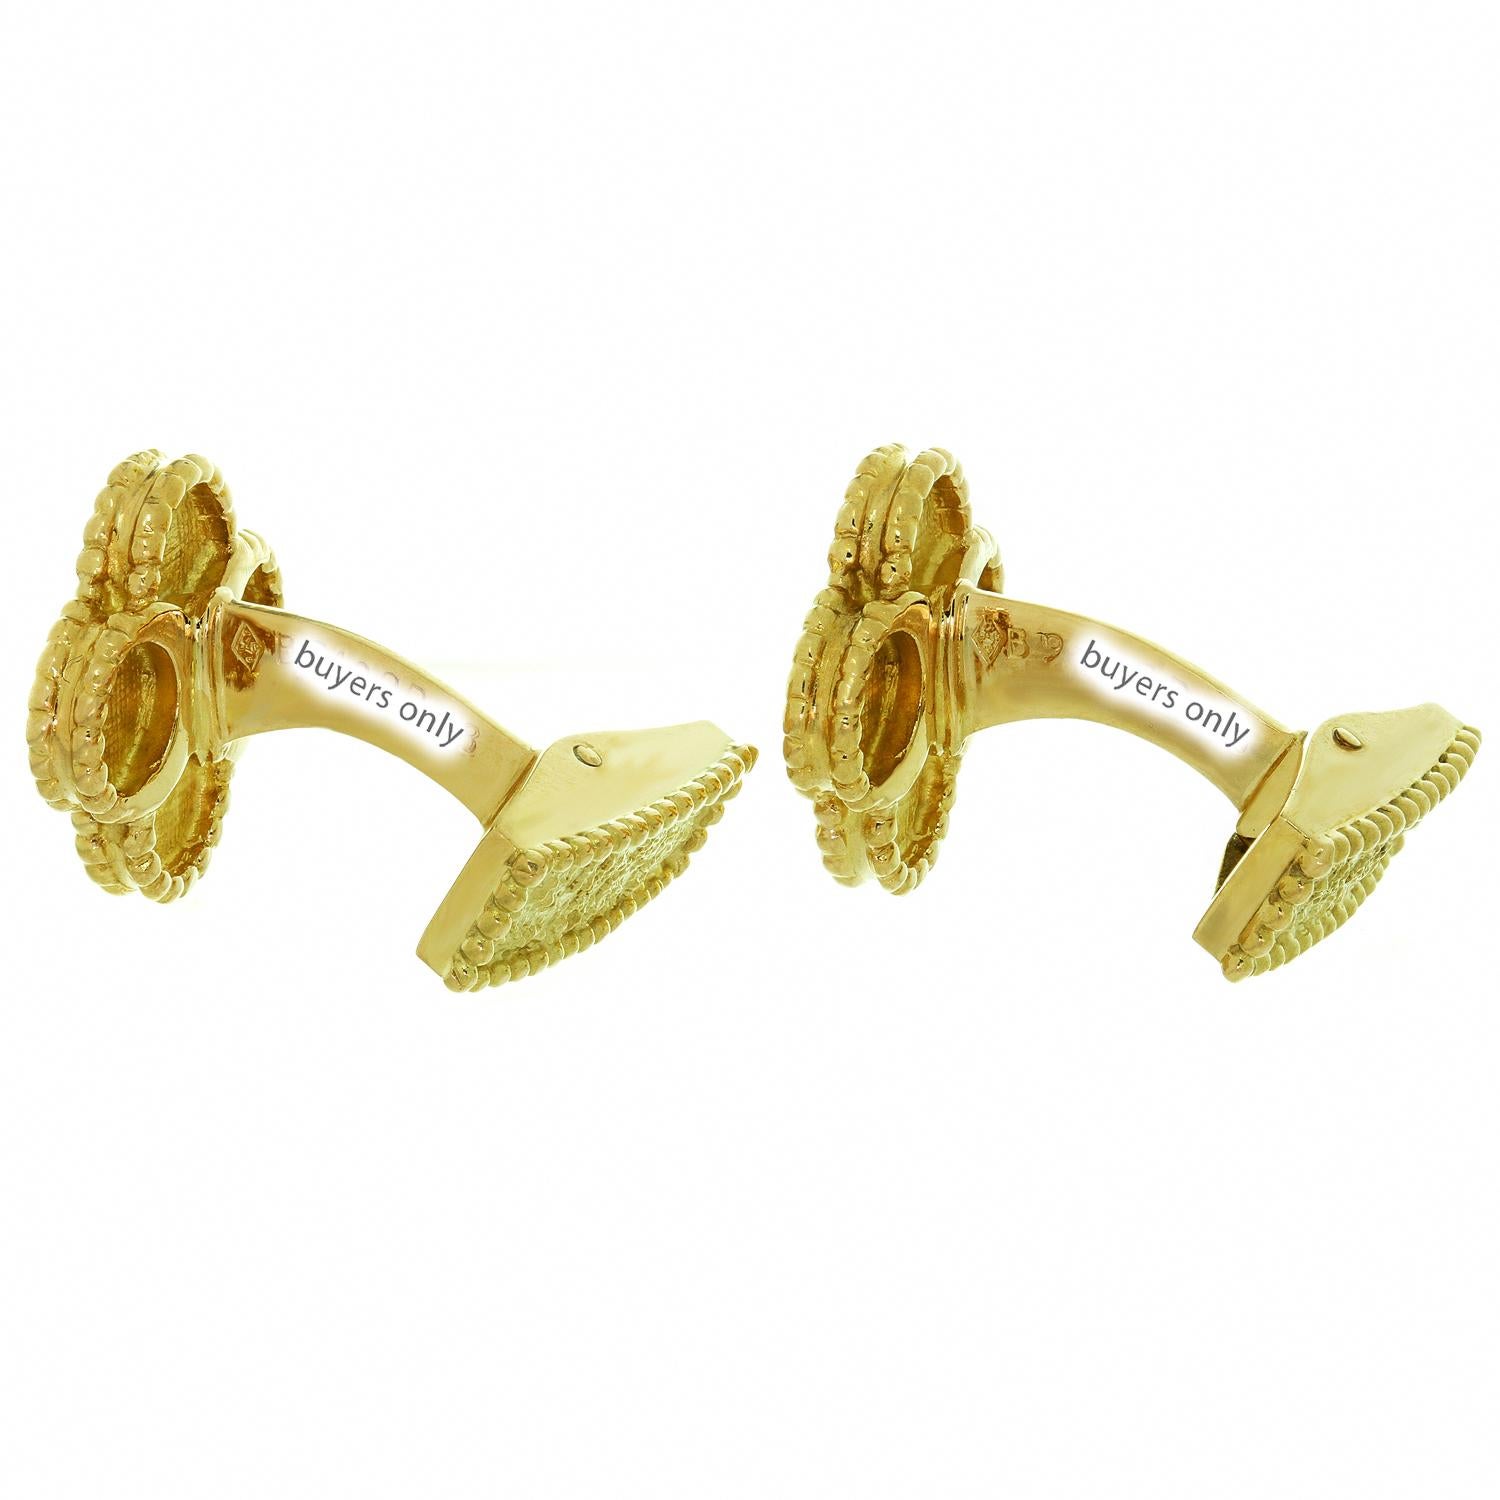 These iconic cufflinks from Van Cleef & Arpels's Vintage Alhambra collection are made in 18k textured yellow gold and feature the classic festive design inspired by the symbol of luck. Made in France circa 1990s. Measurements: 0.59